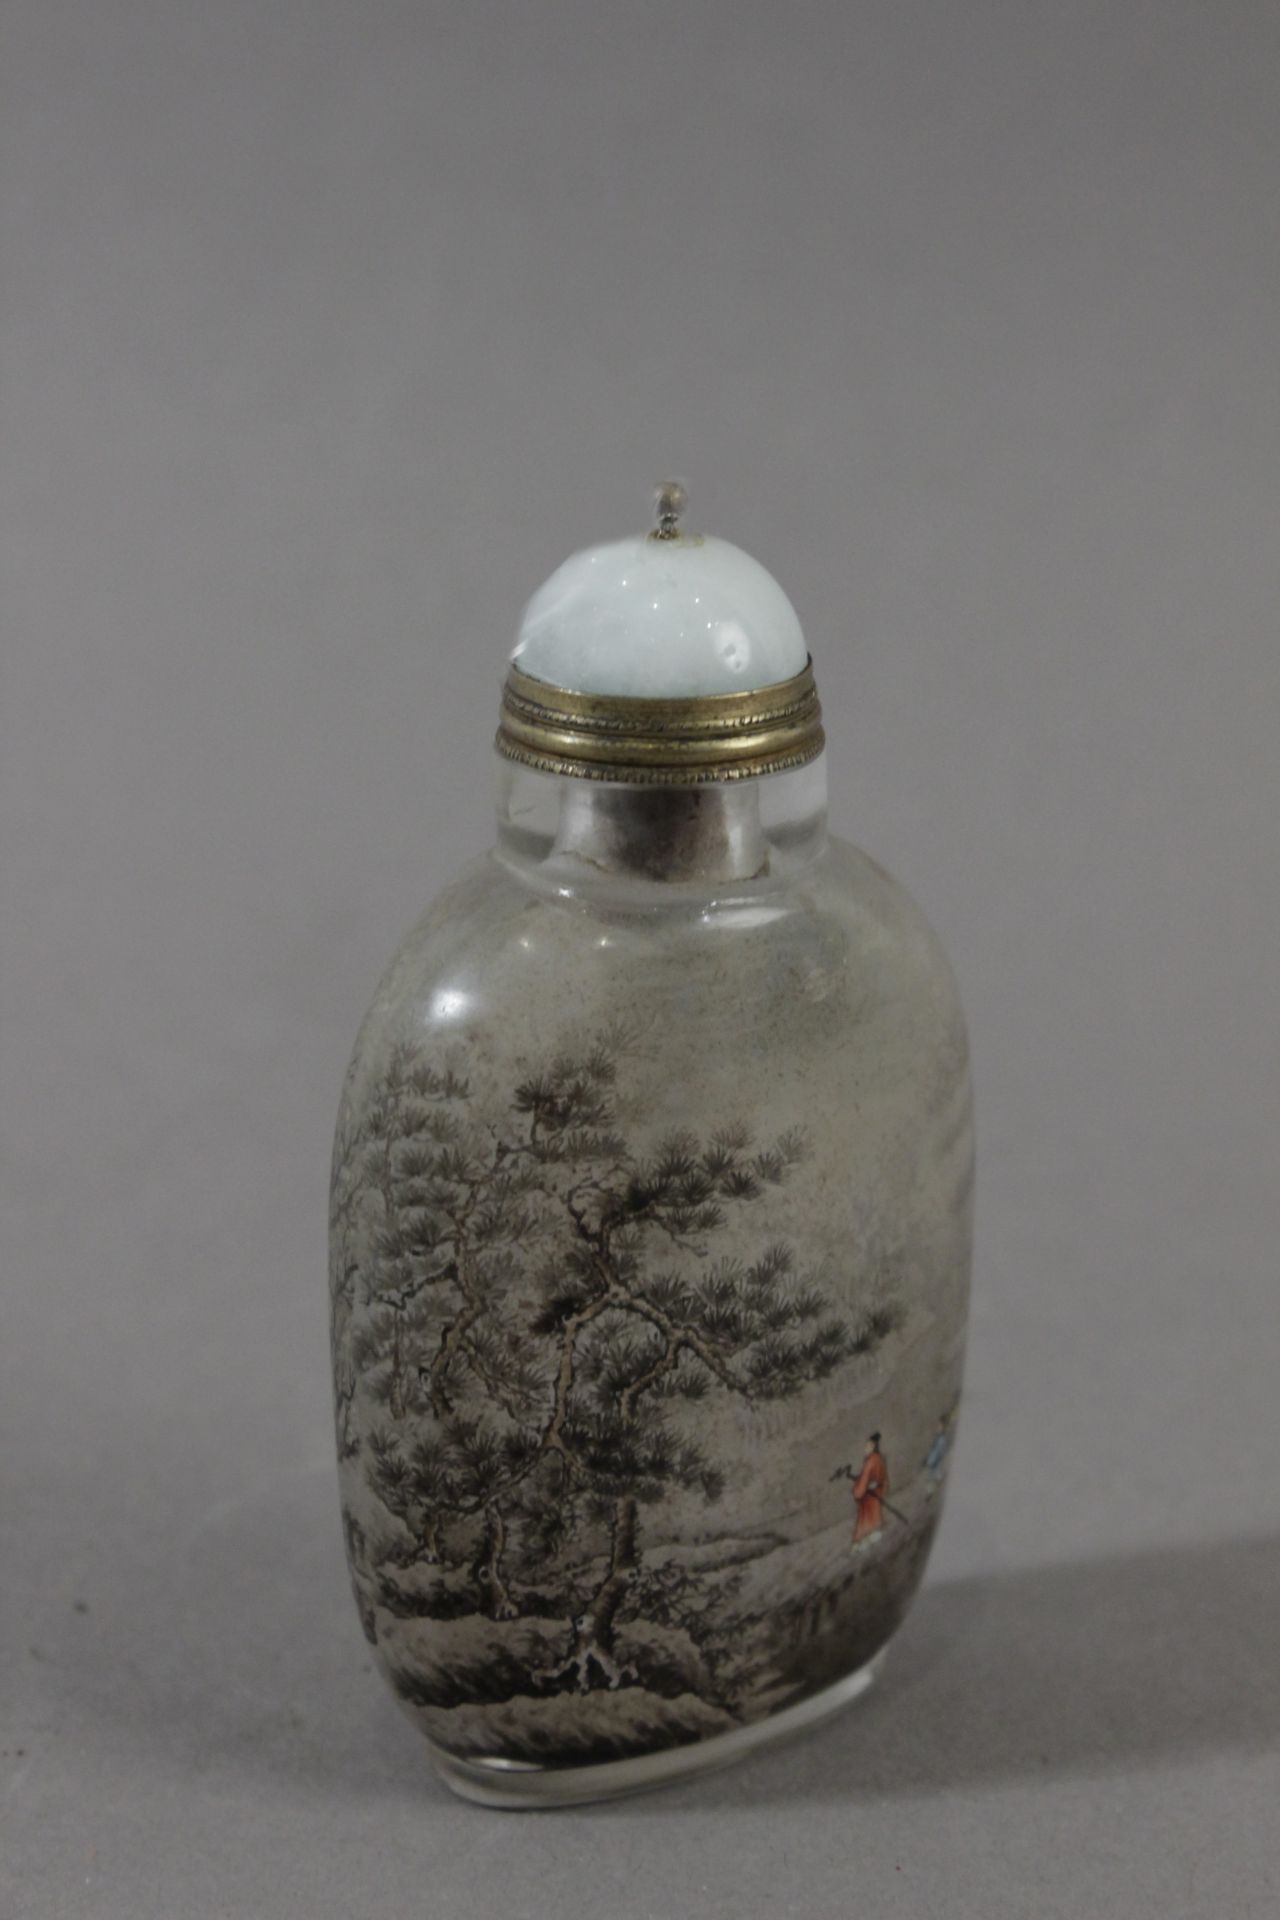 A 20th century Chinese snuff bottle from Republic period